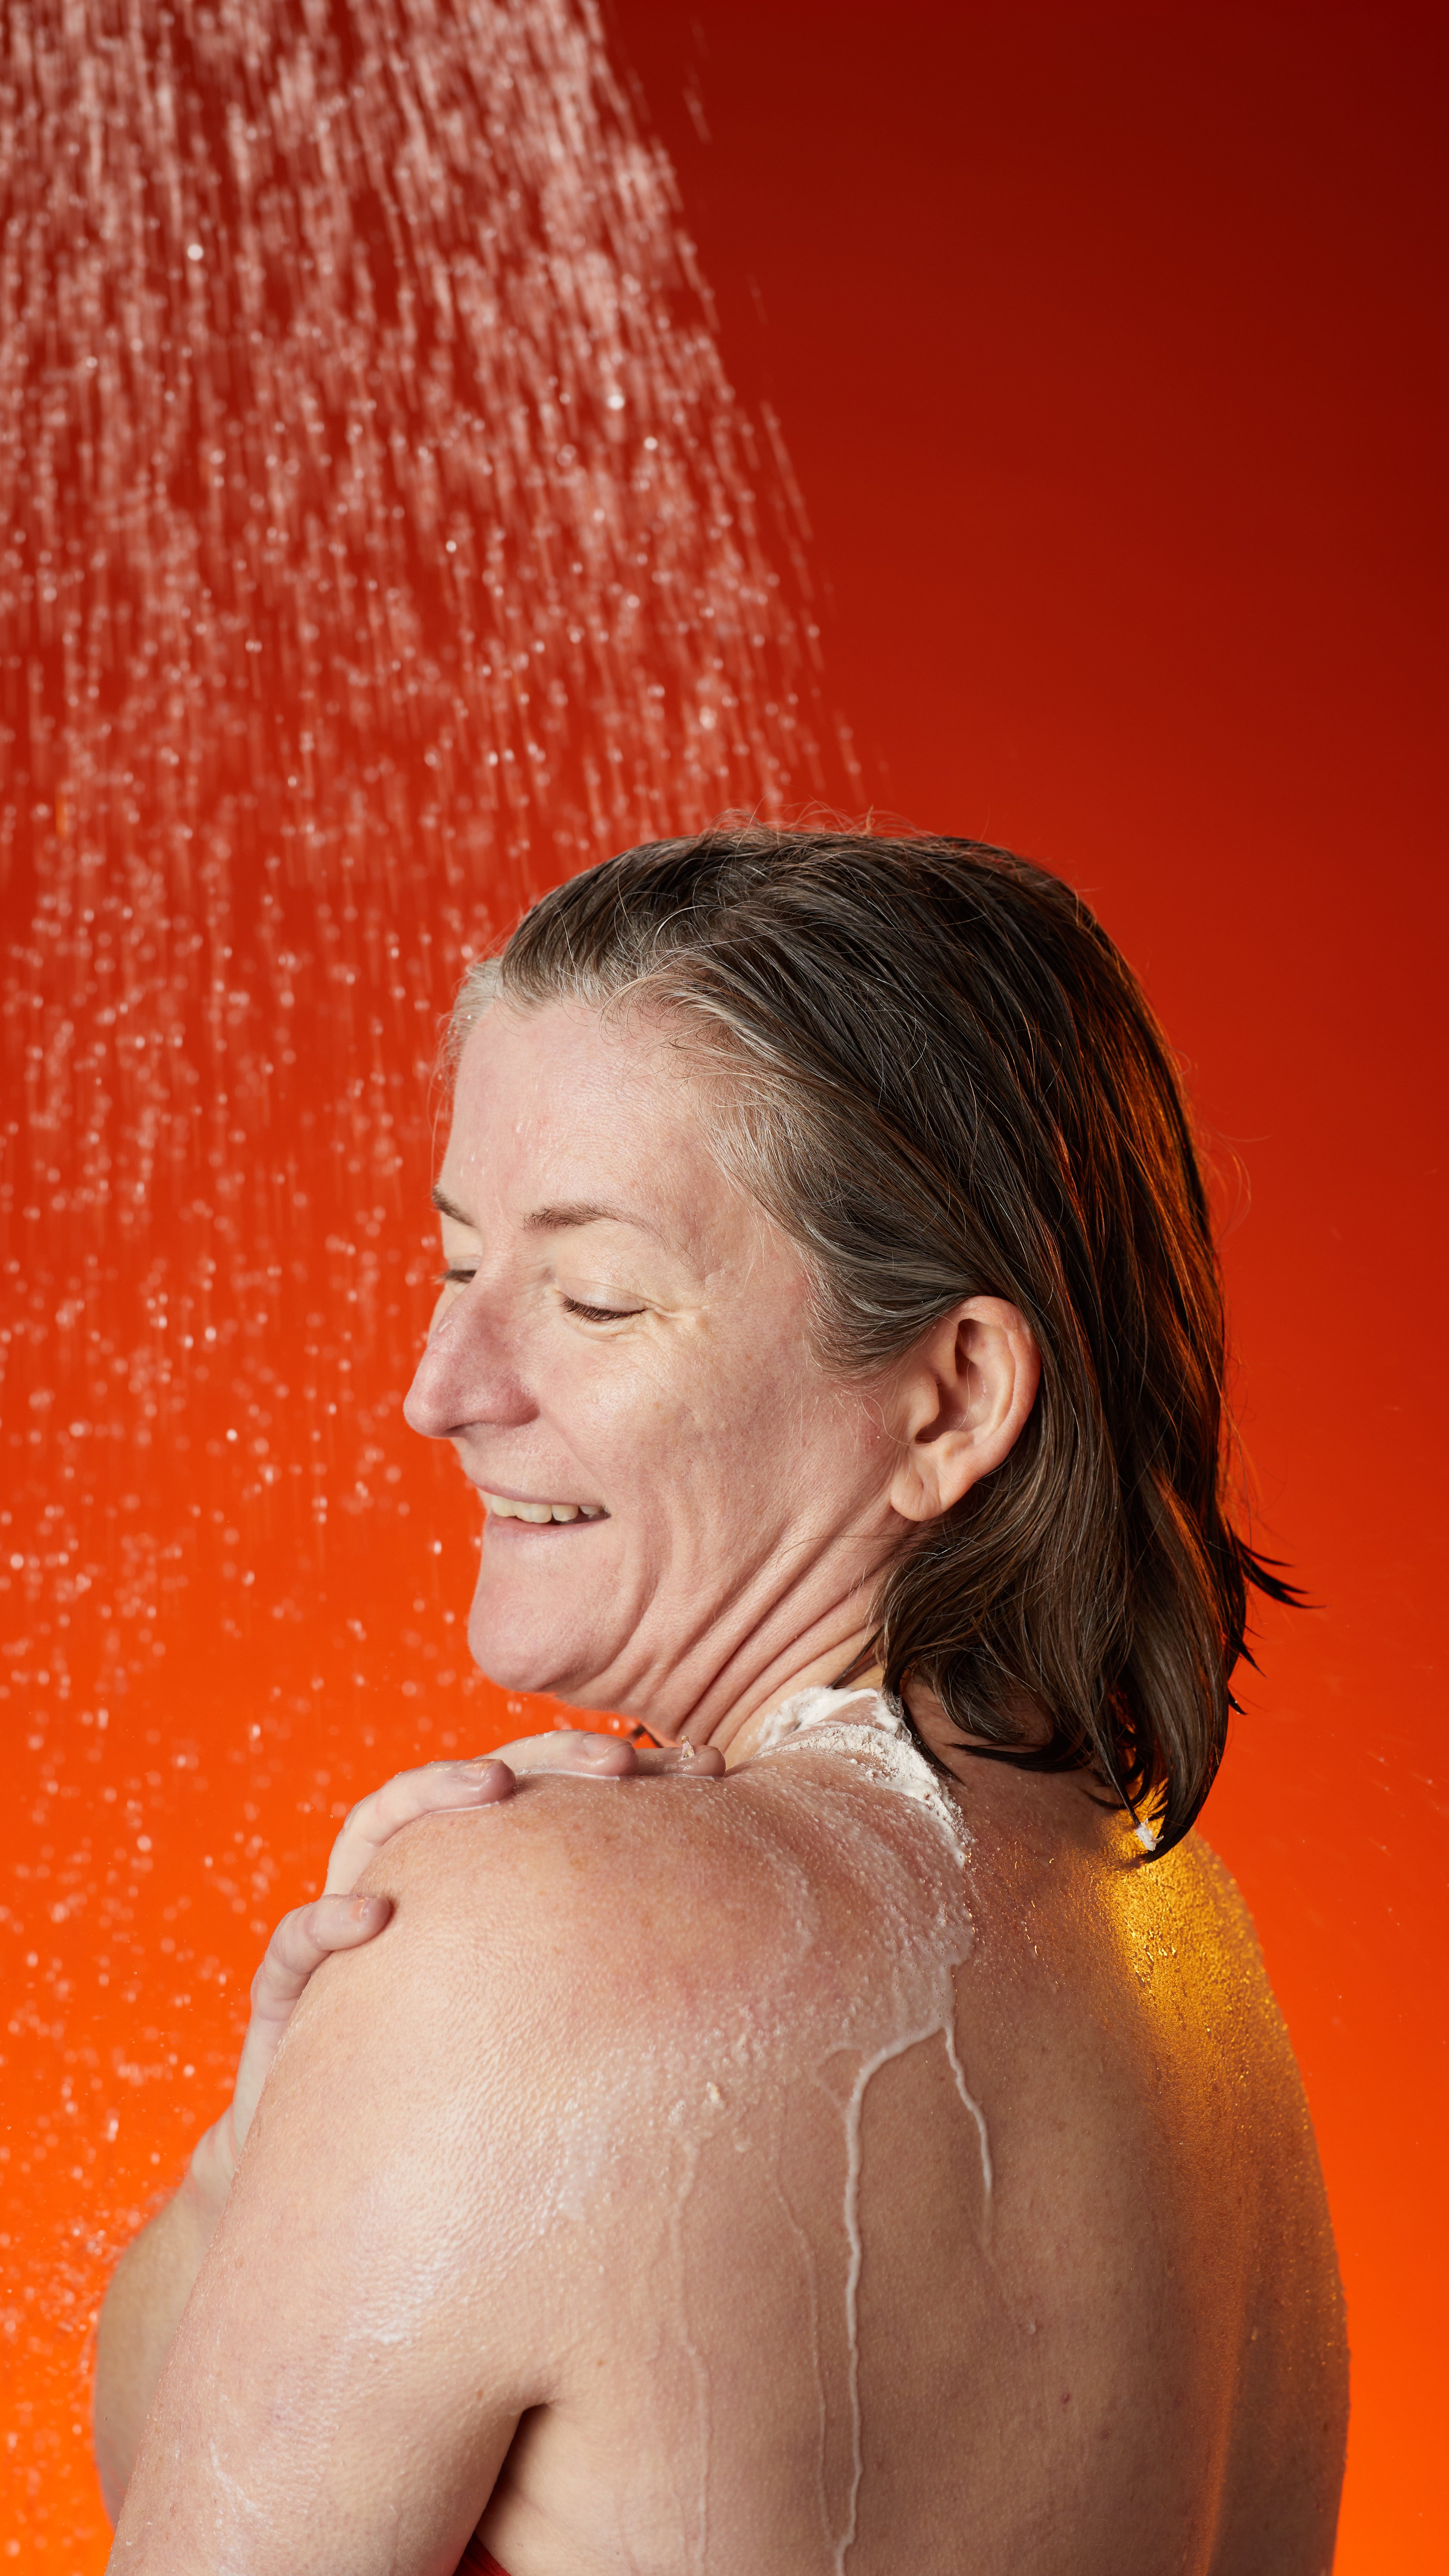 The model is showering with their back turned using the product in front of a dark to light orange gradient background.